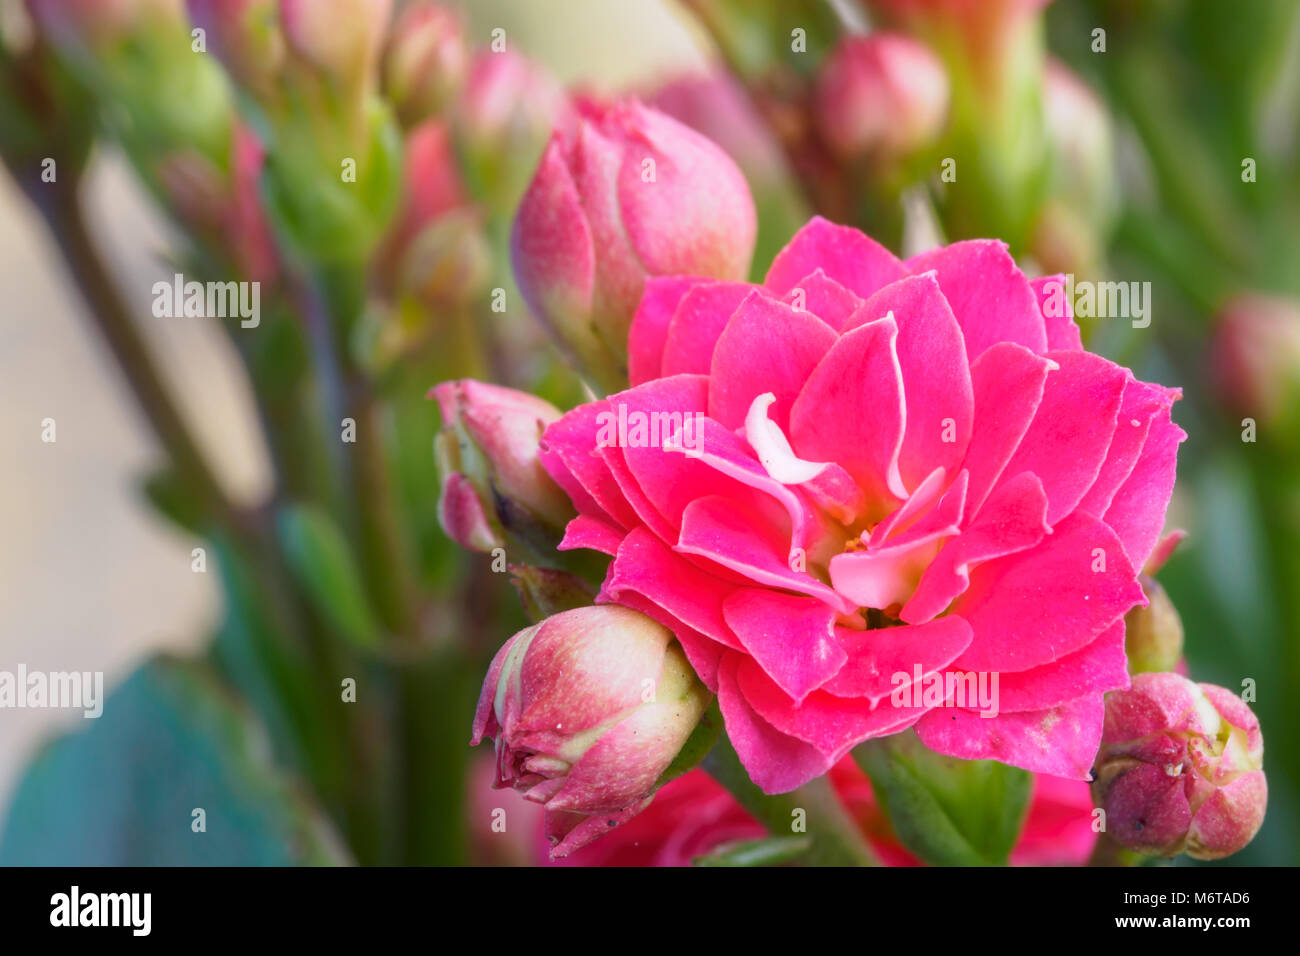 Close-up colorful small pink flowers of Kalanchoe. Stock Photo